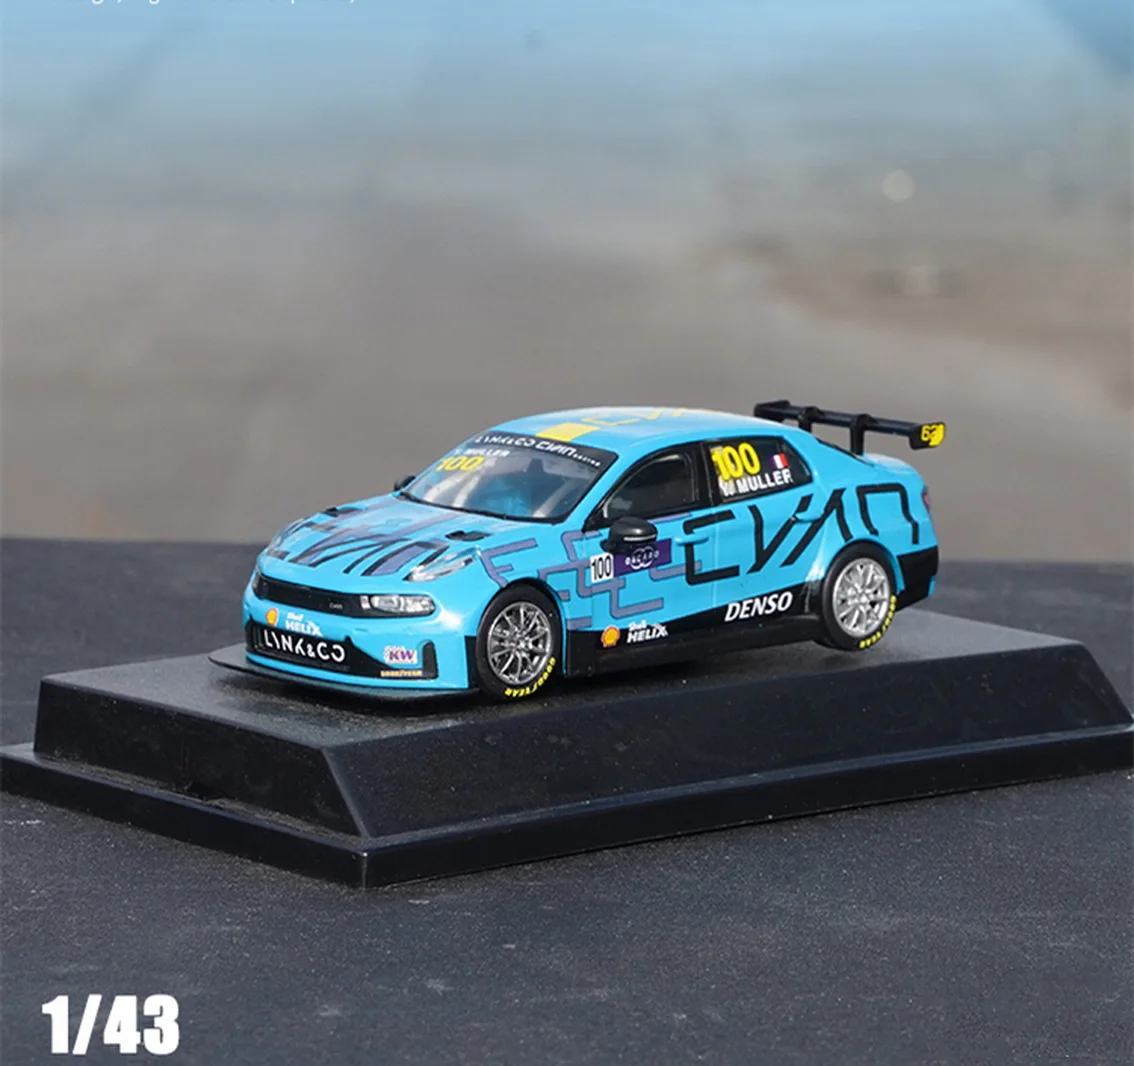 

1/43 Scale LYNK CO 03 TCR WTCR #100 Diecast car Model Toy Collection Gift NIB